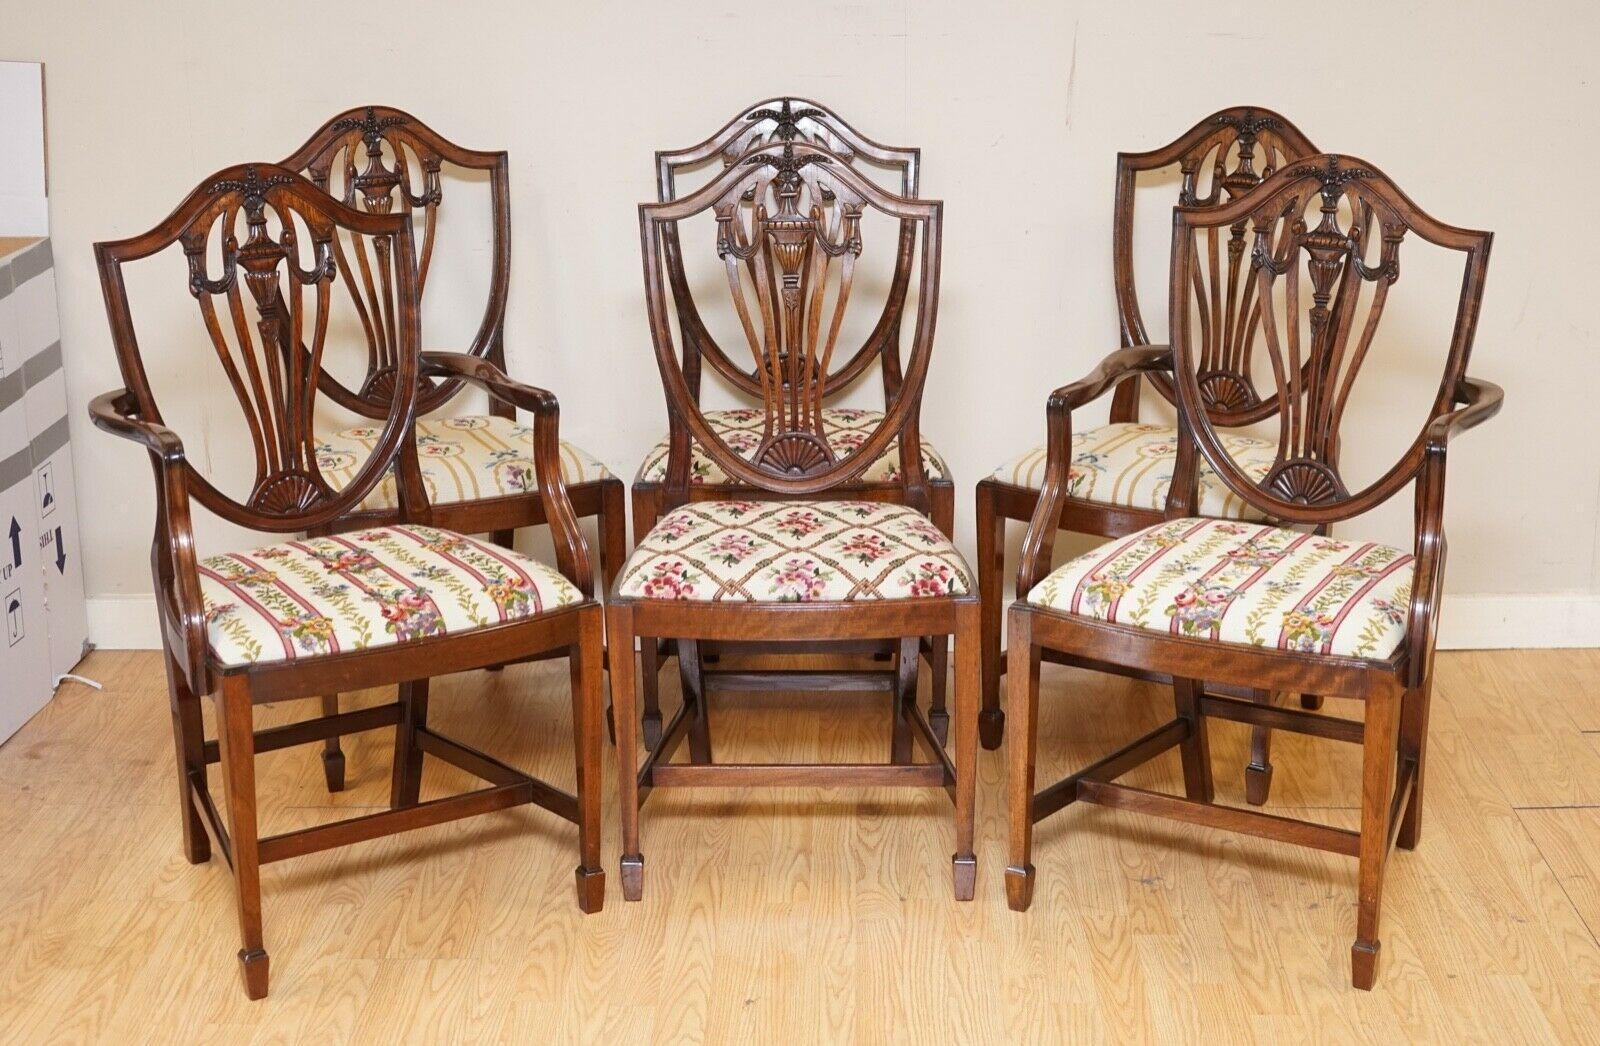 Vintage Set of 6 Georgian Hepplewhite Style Dining Chairs with Woven Seats 7